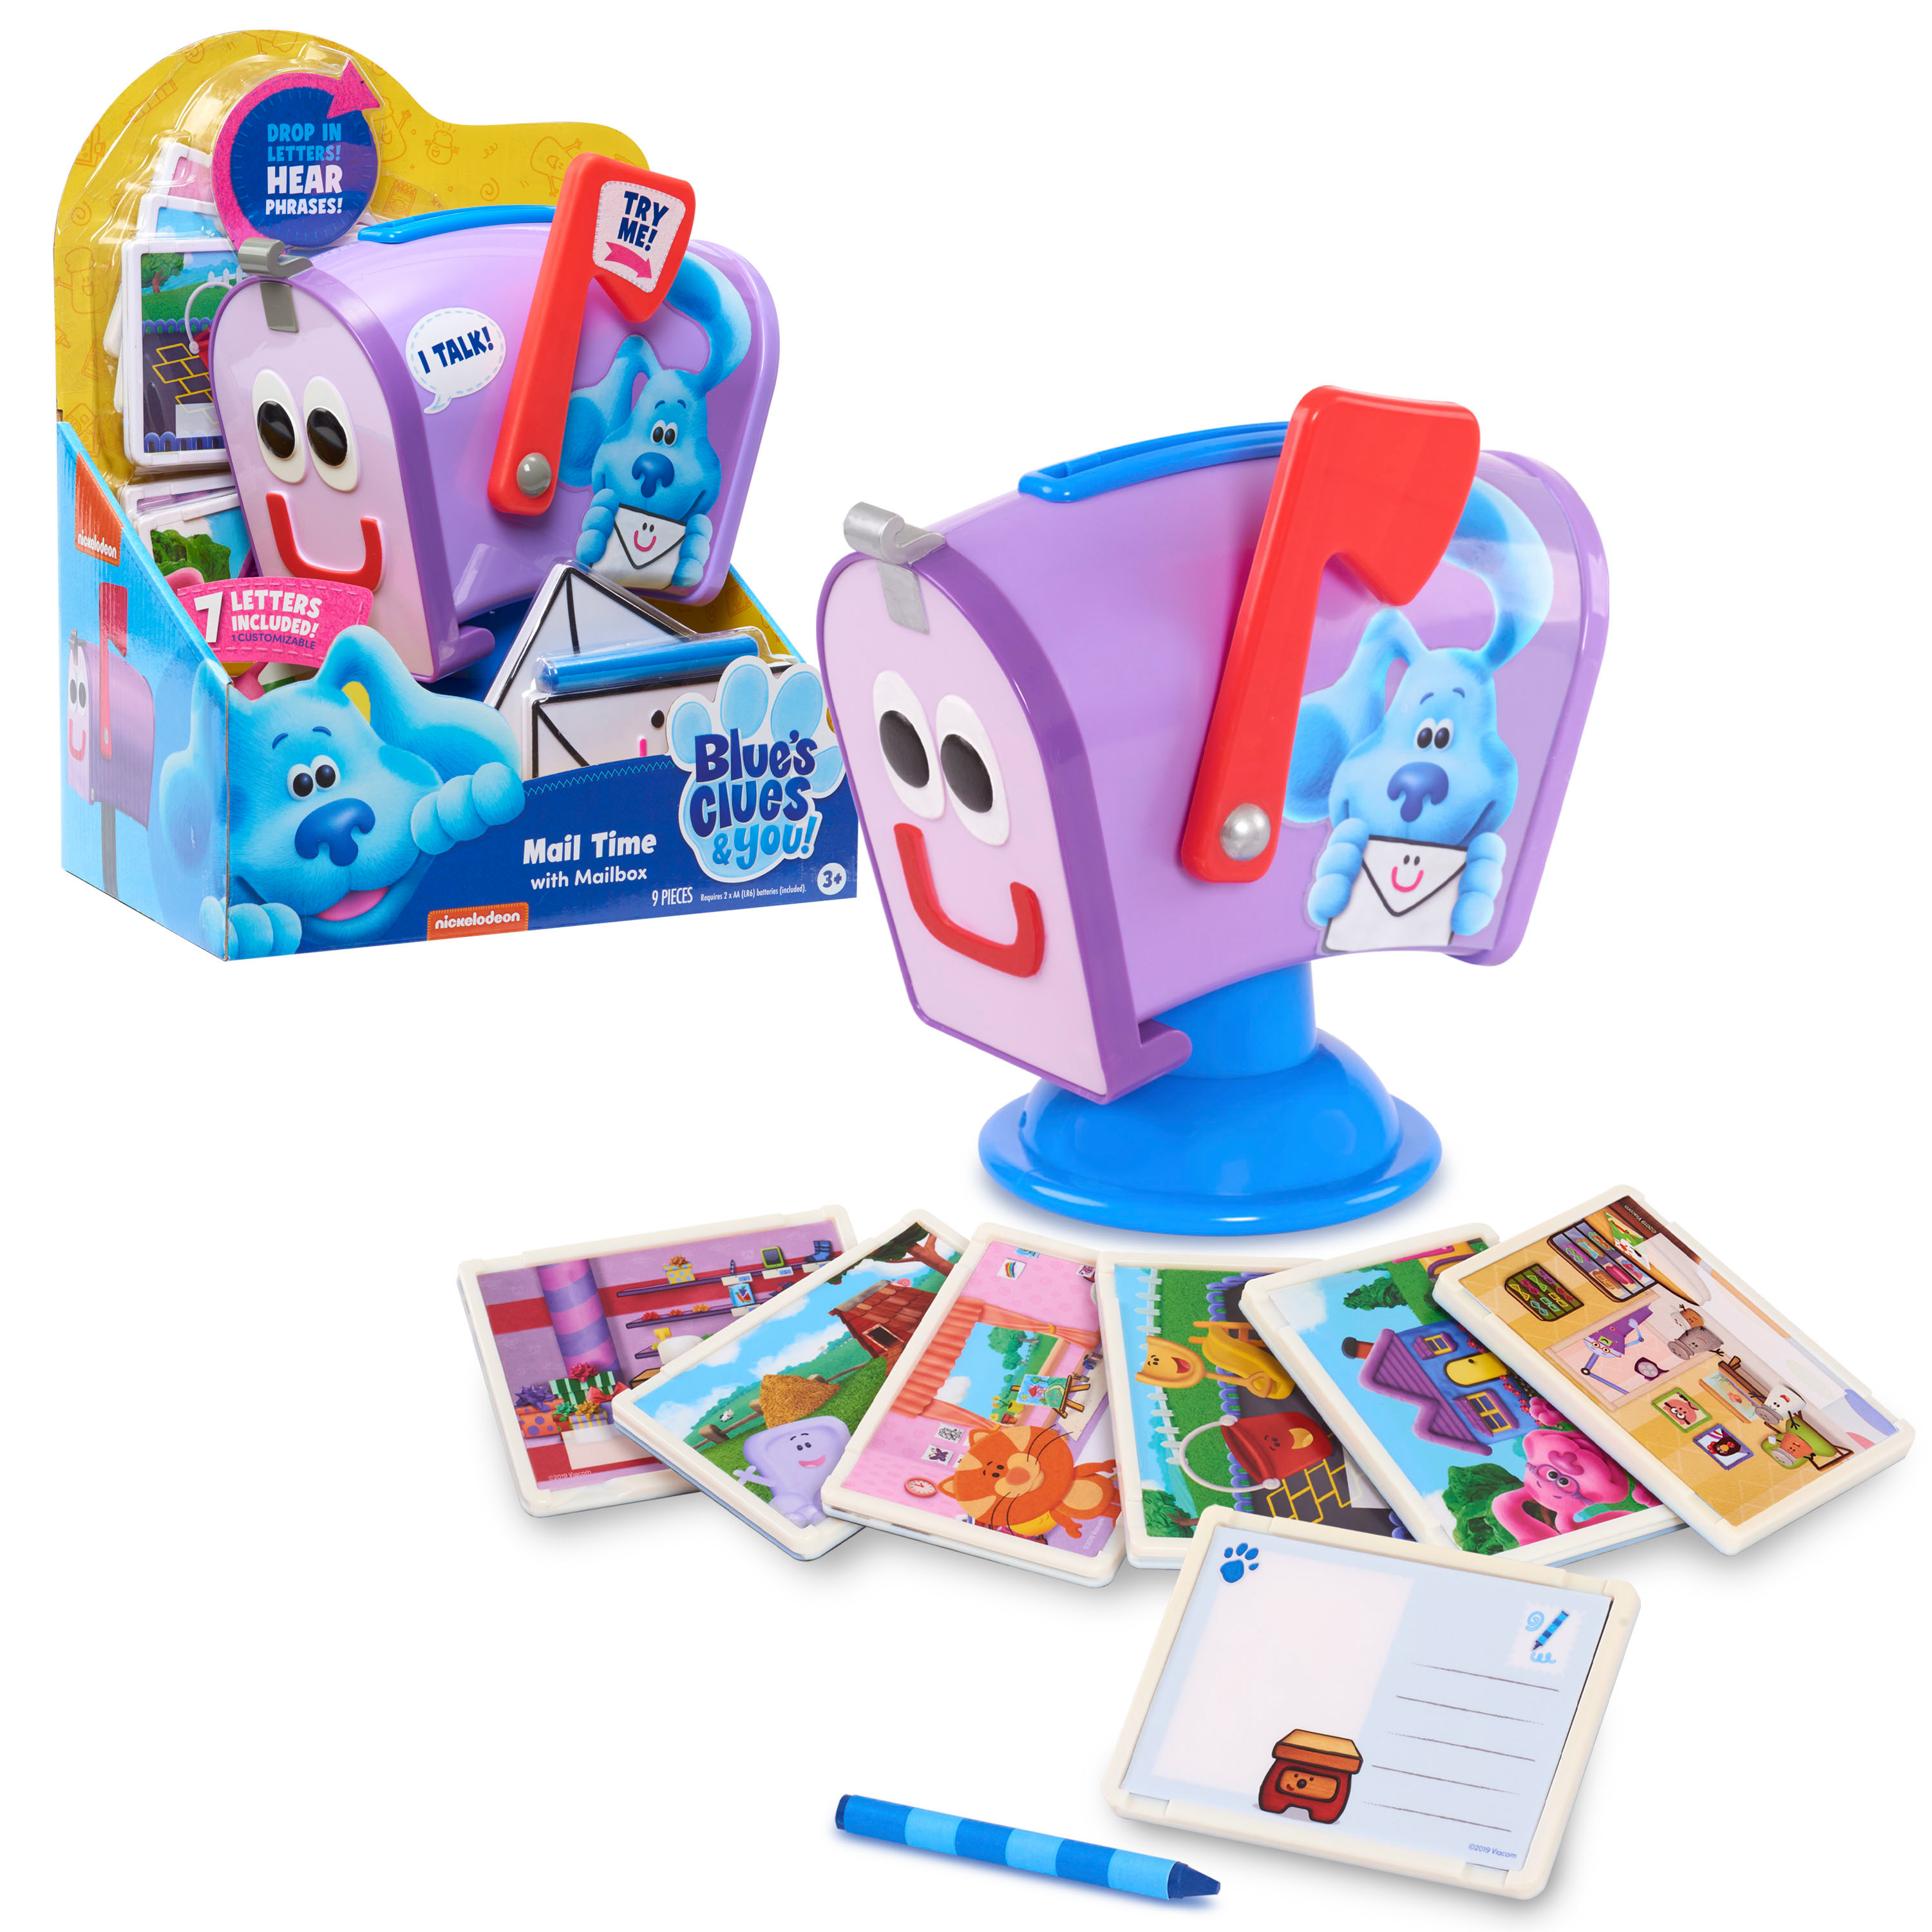 Blue's Clues & You! Mail Time with Mailbox Toy for Kids with Sound,  Kids Toys for Ages 3 Up, Gifts and Presents - image 1 of 8